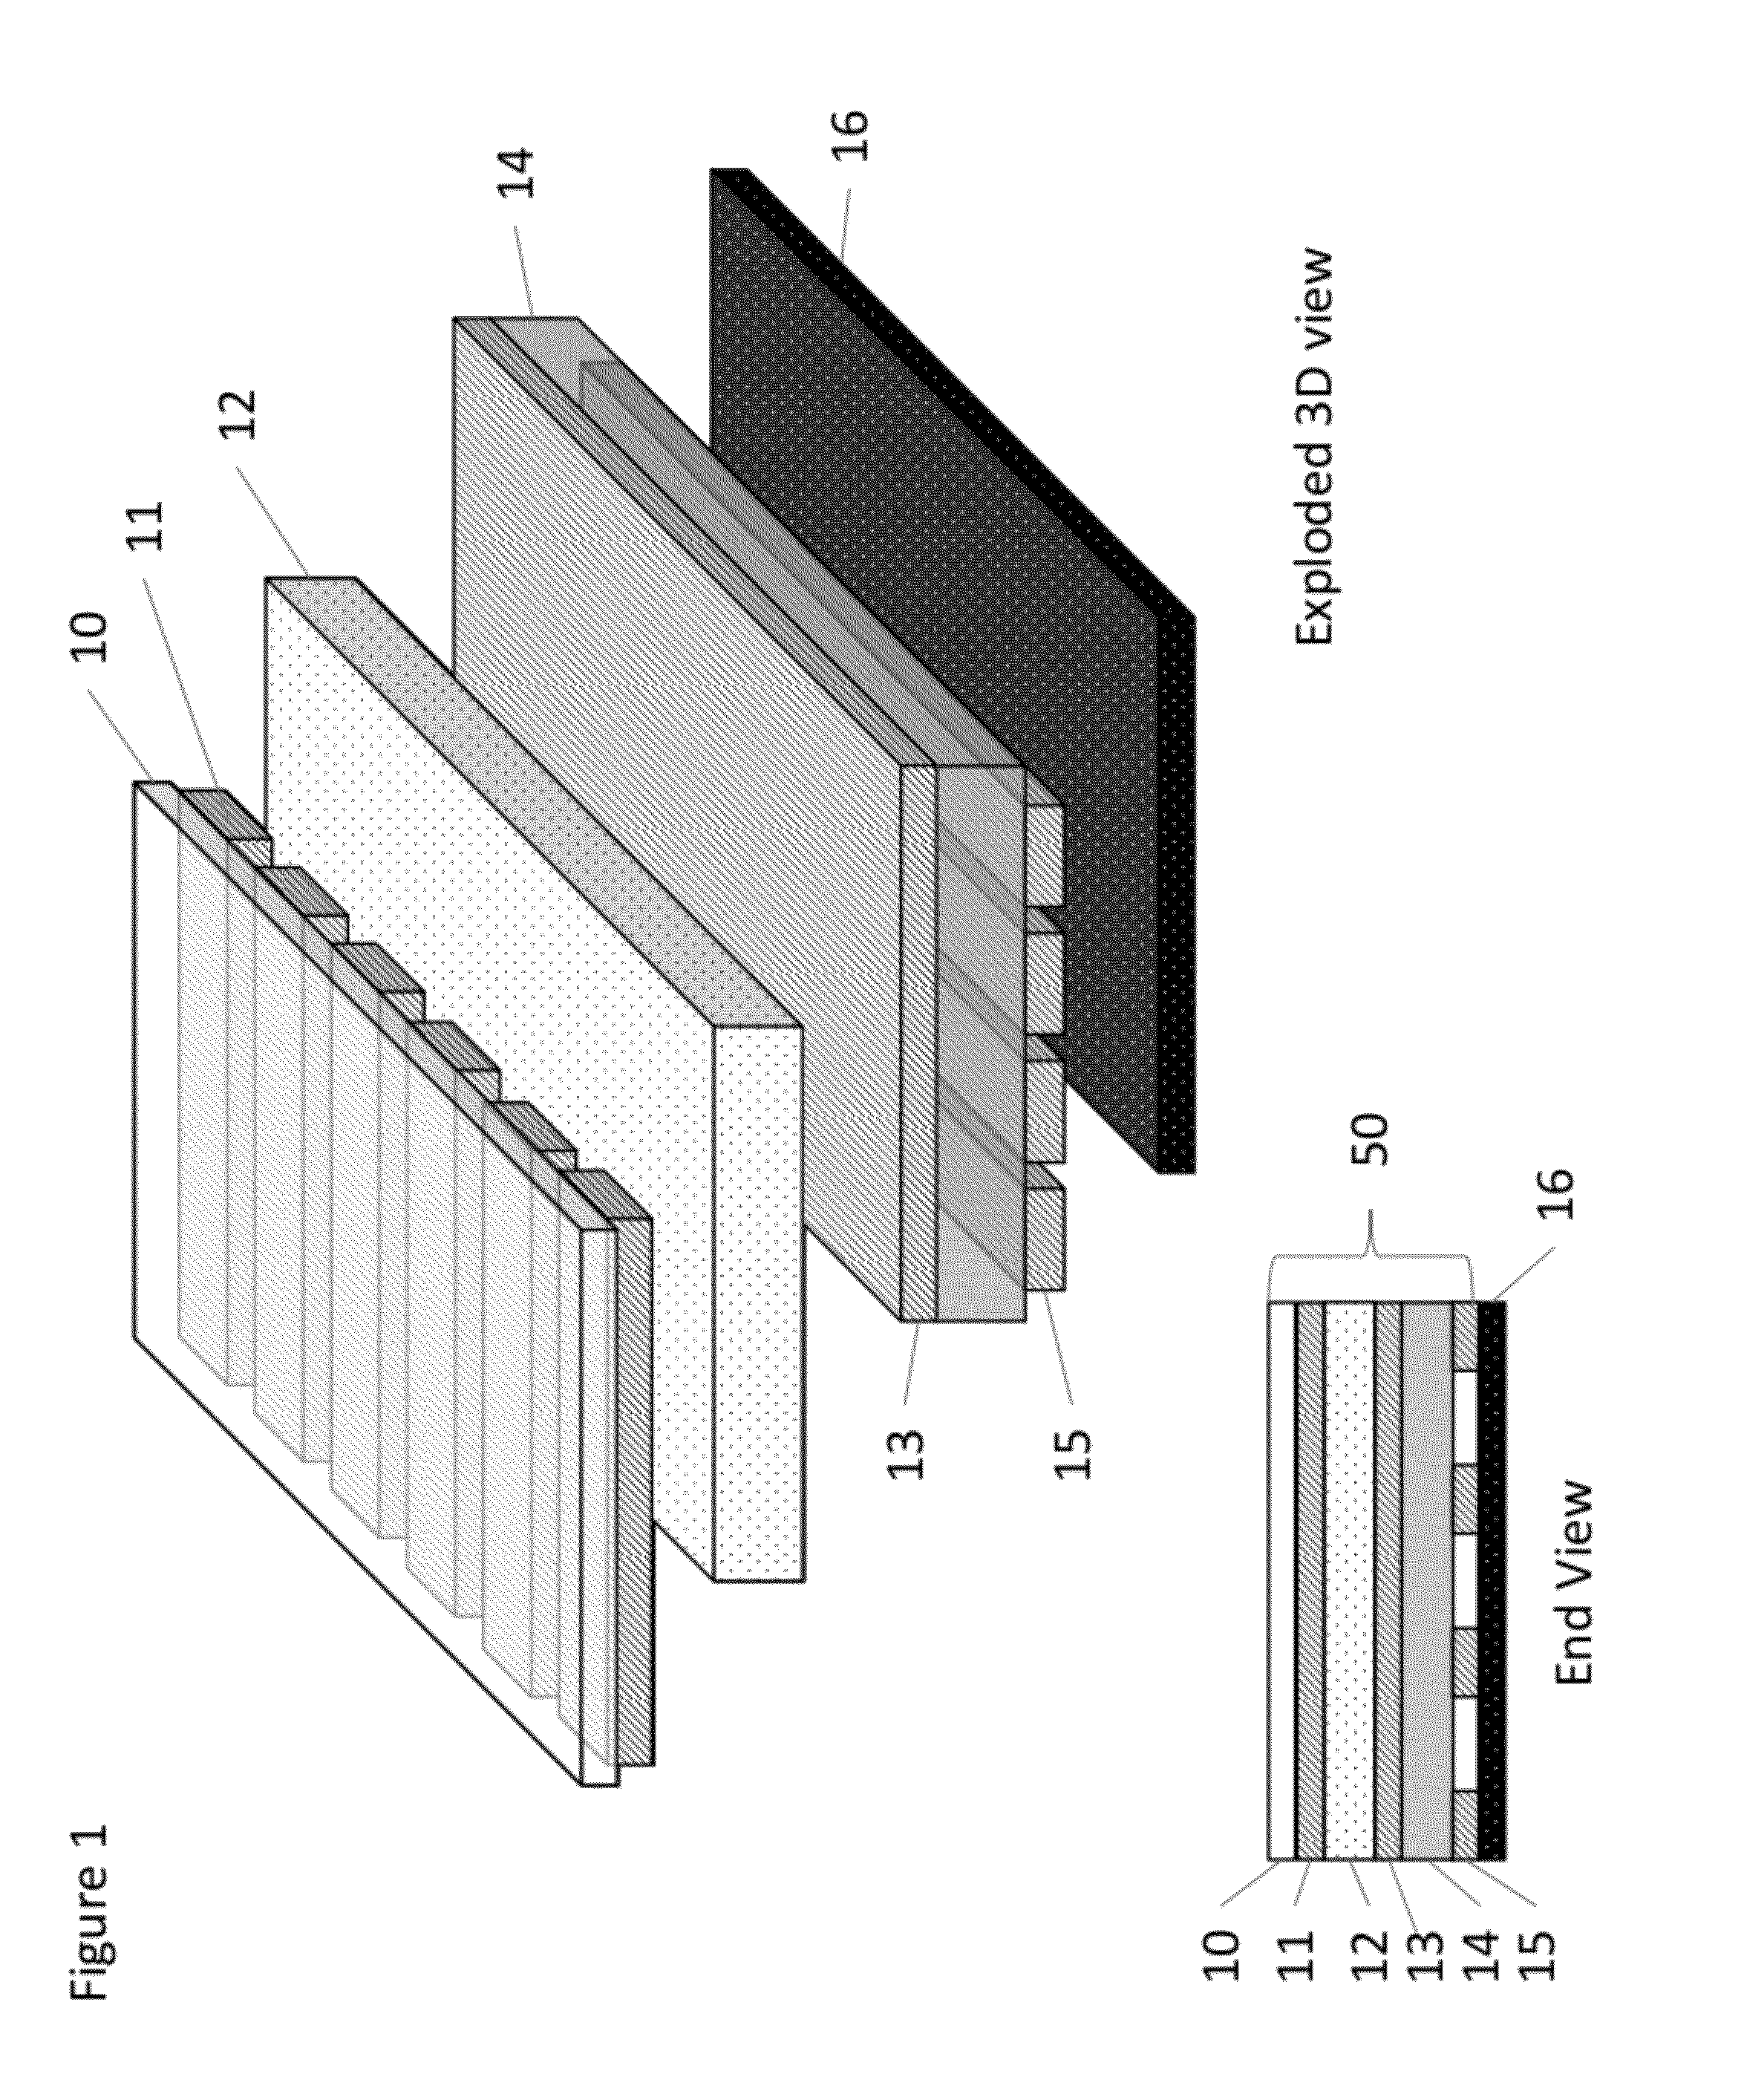 Display device including piezoelectric and liquid crystal layers